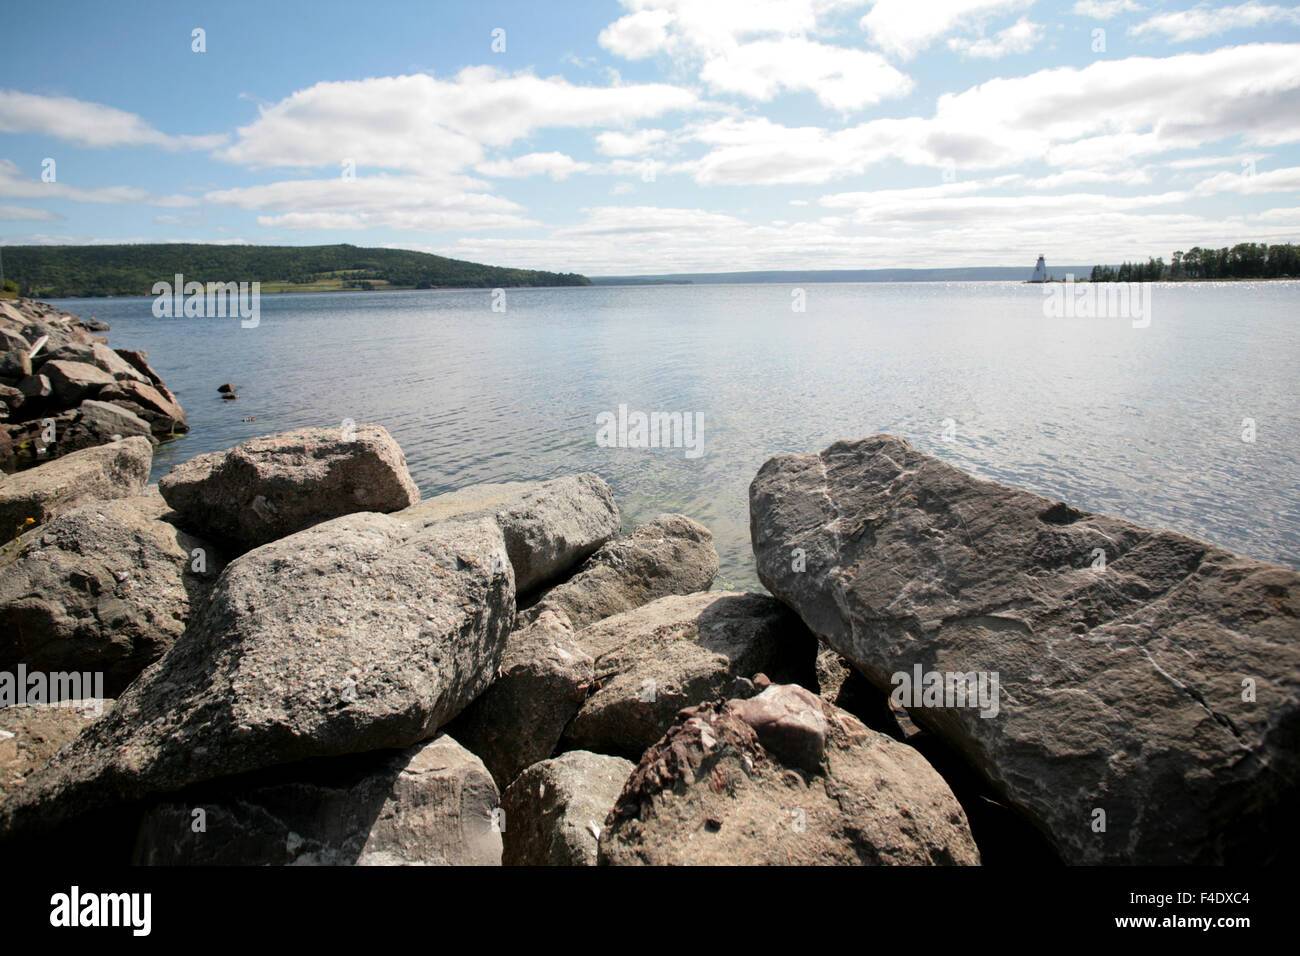 View from St. Ann's Lookout towards Ferry, Bras D'Or Lakes, Cape Breton,  Nova Scotia, Canada Stock Photo - Alamy